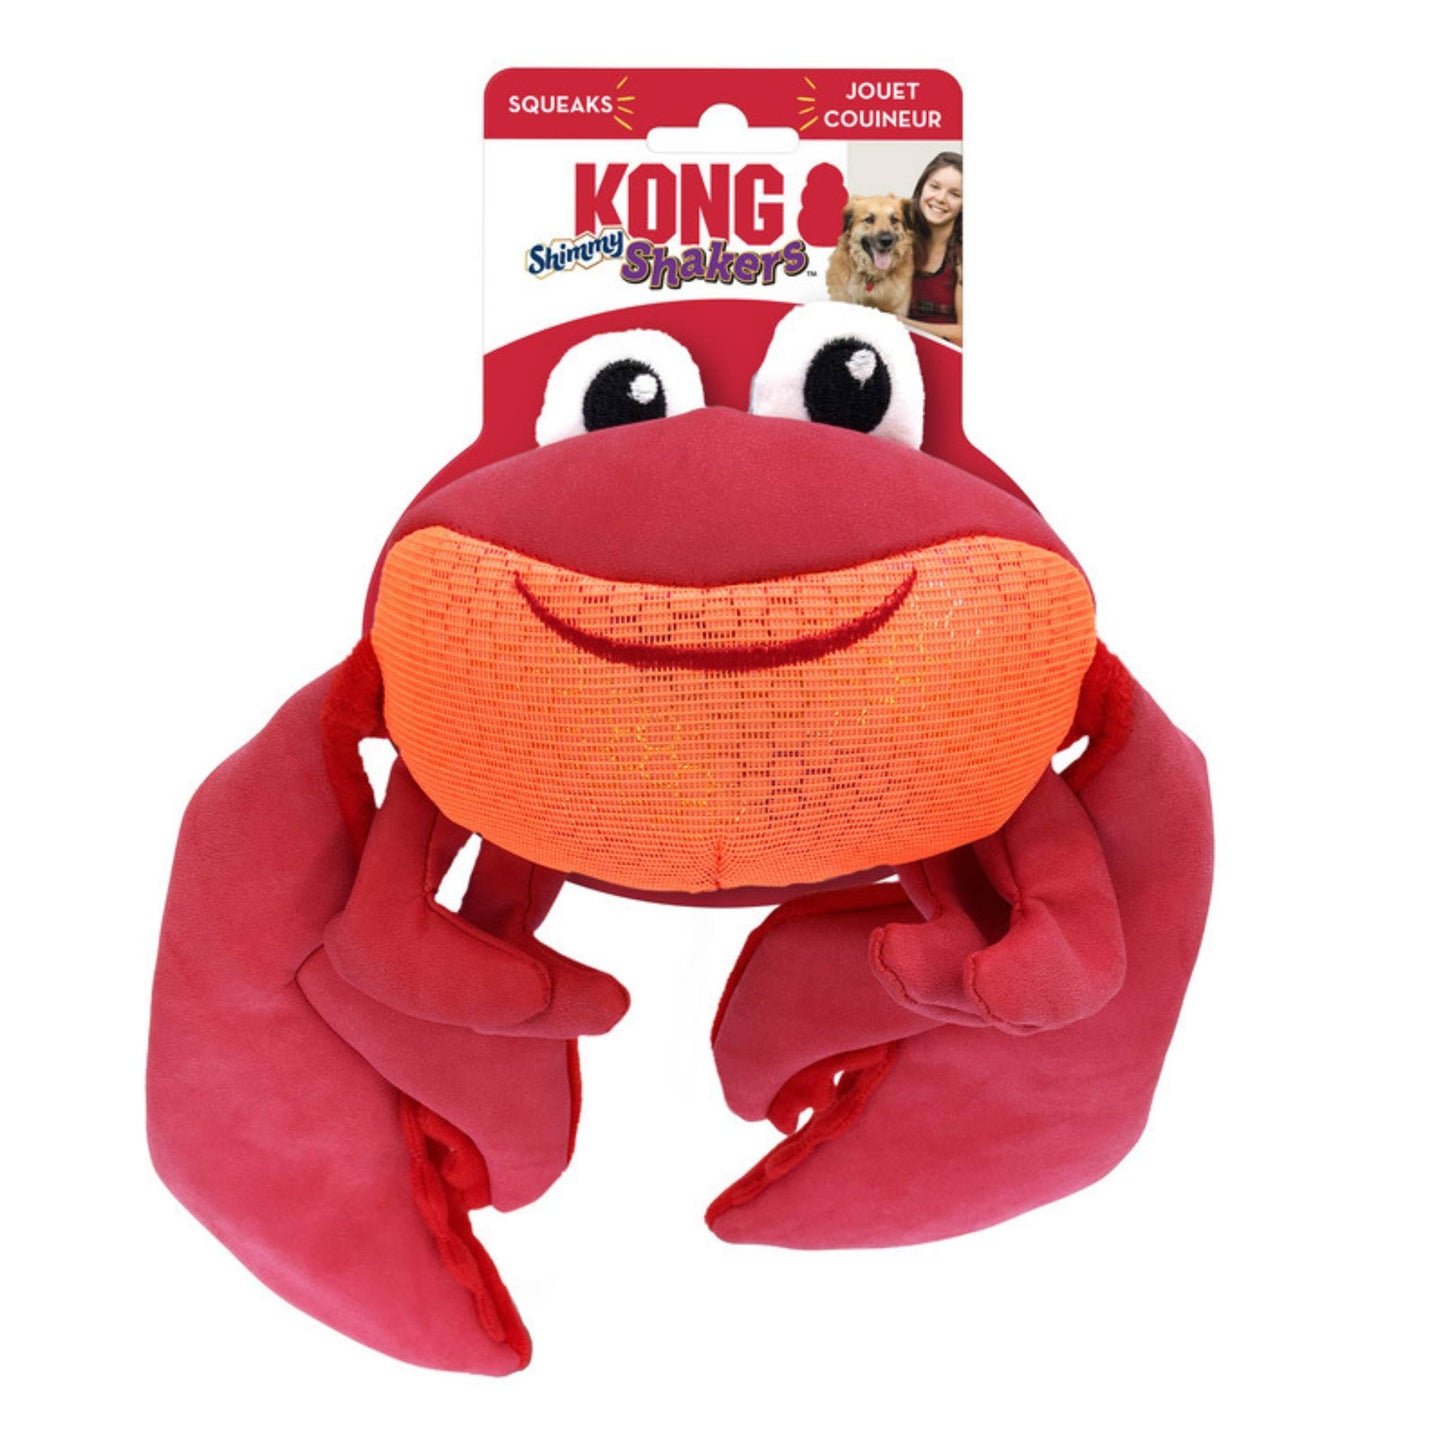 KONG shakers shimmy crab dog toy in package